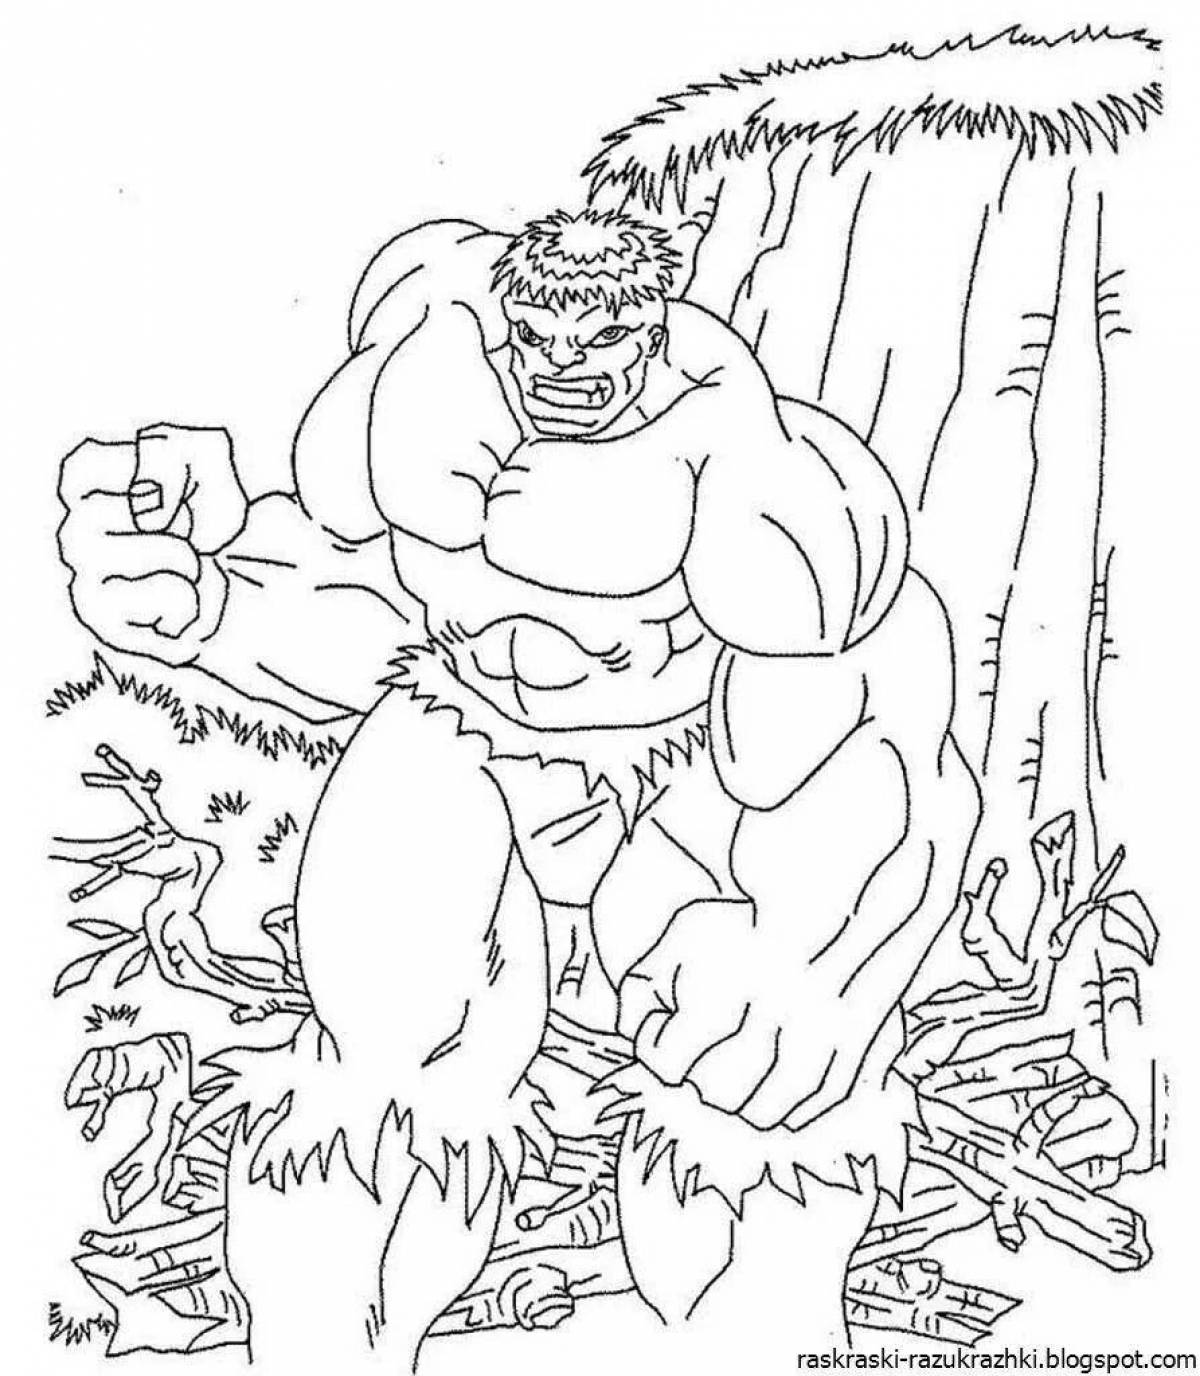 Richly illustrated hulk coloring book